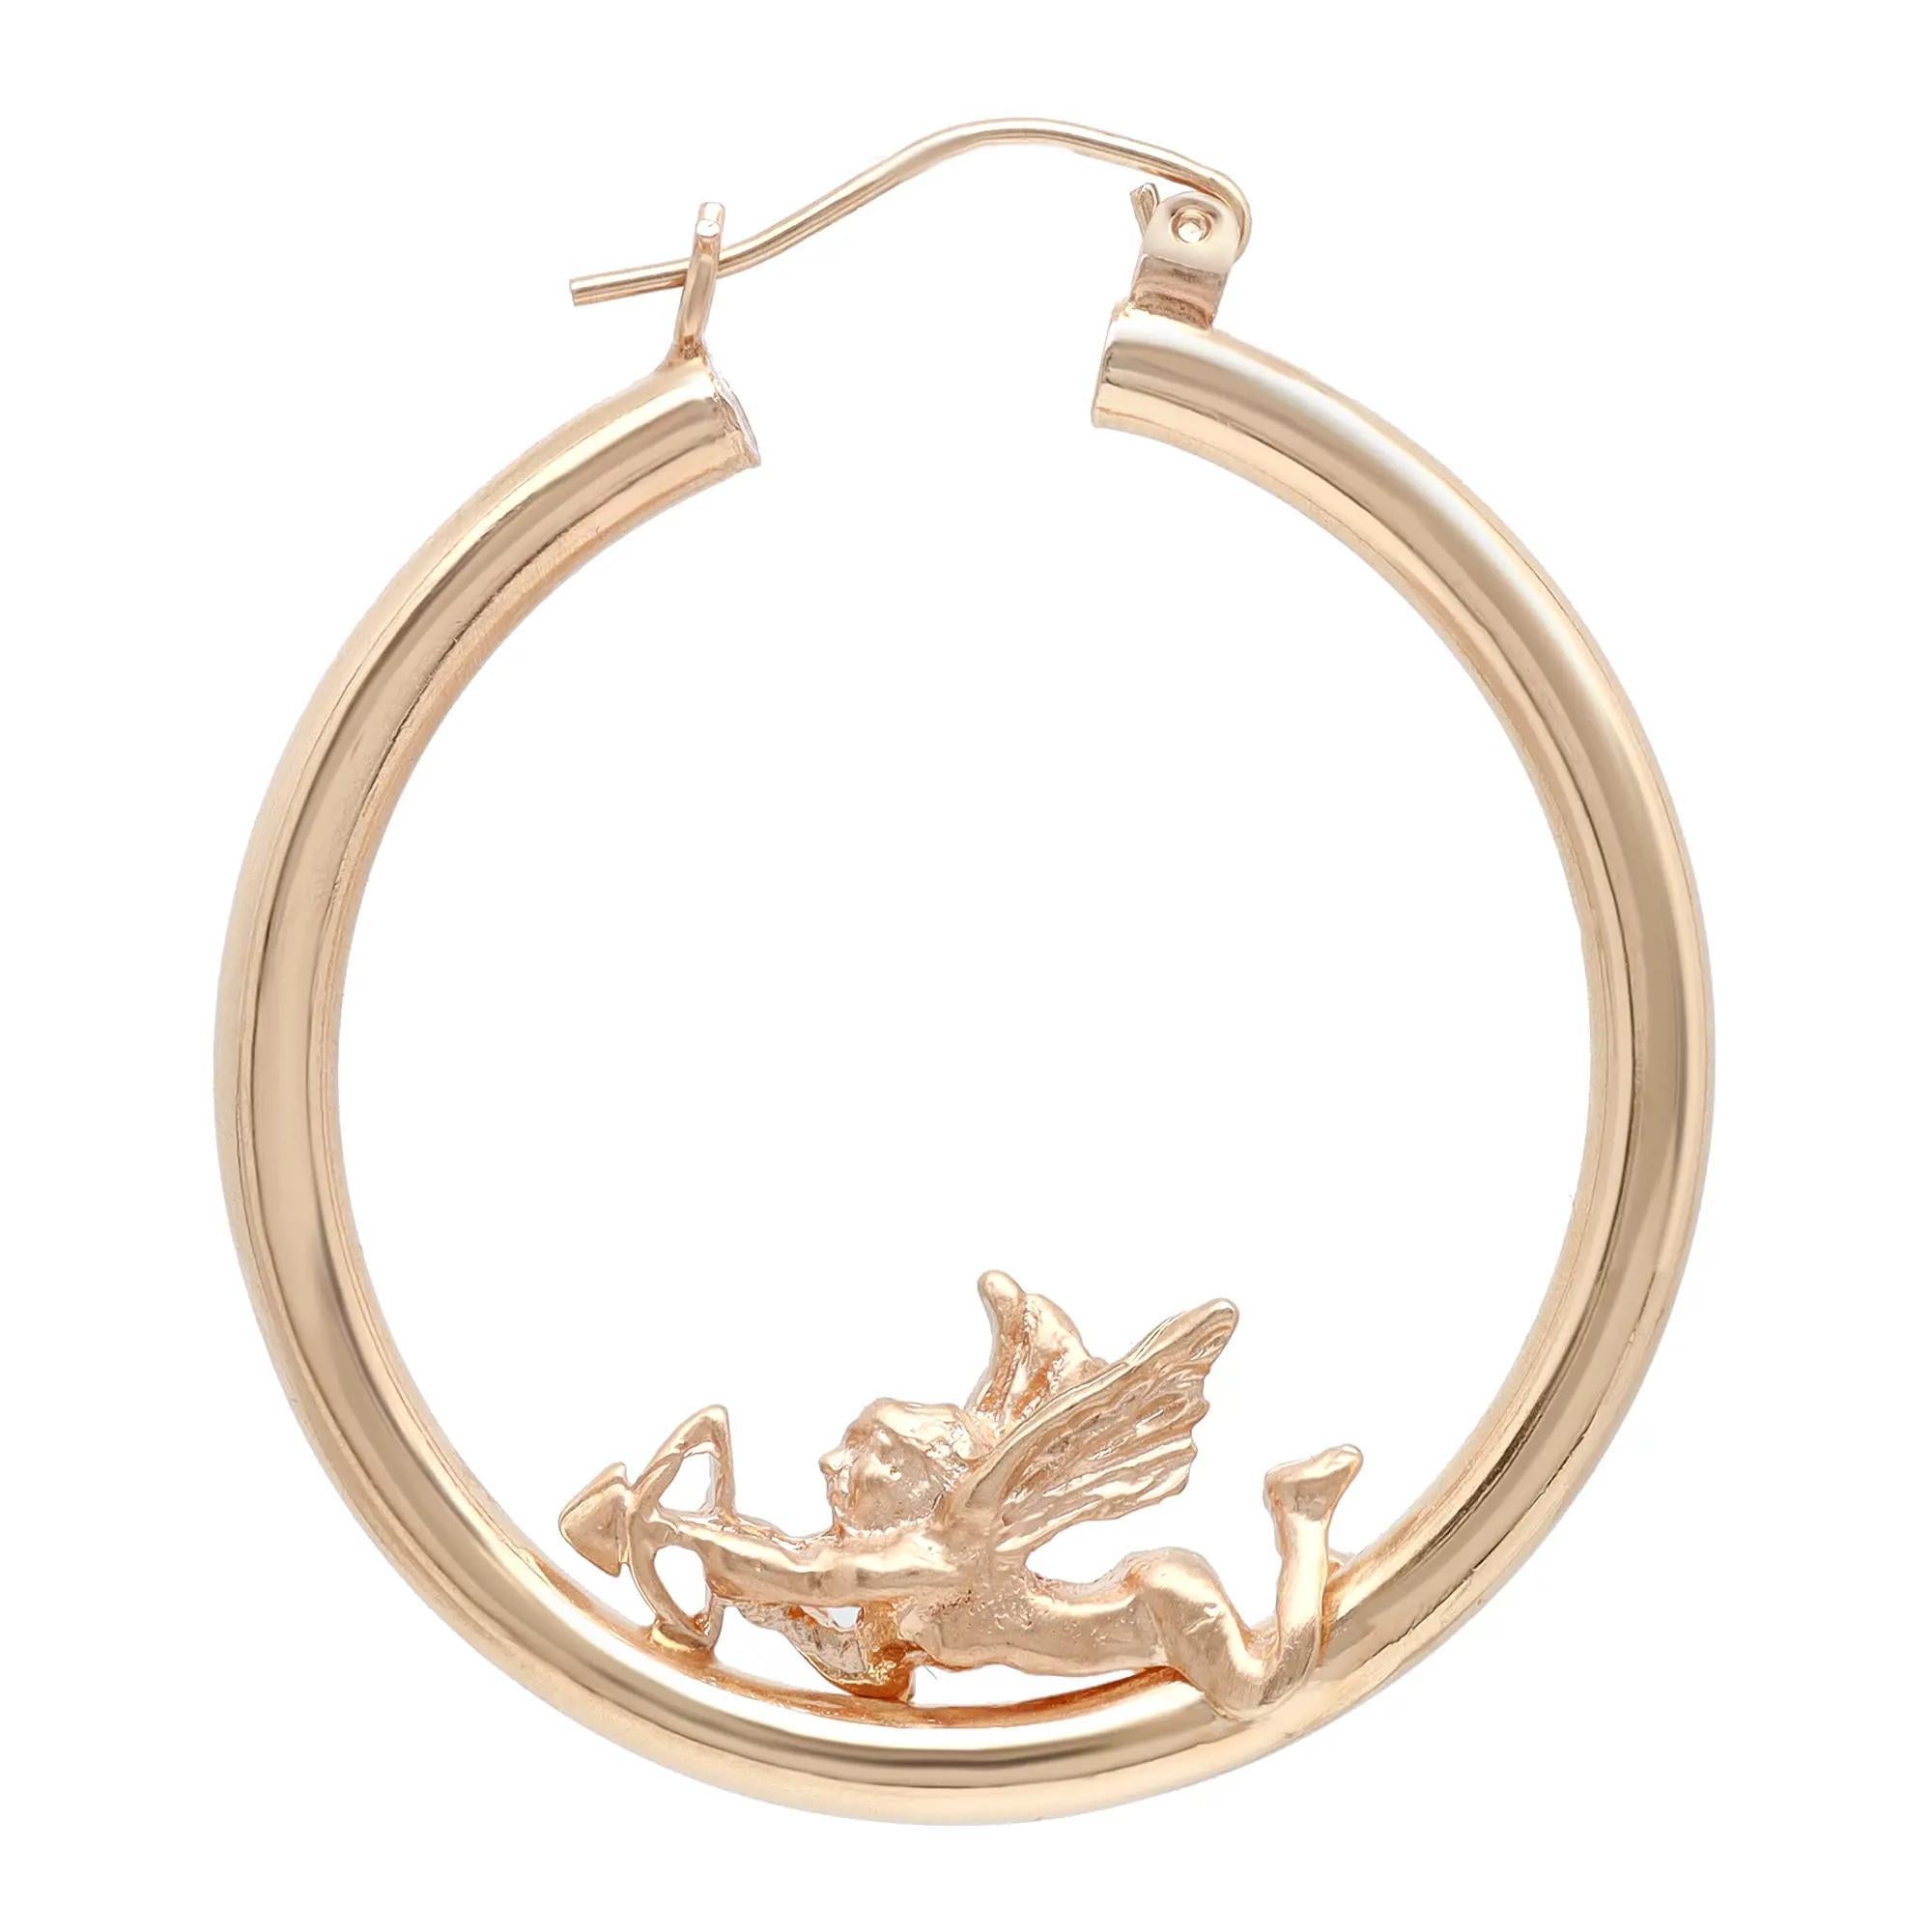 These chic and trendy round hollow hoop earrings showcase stunning 3D angel cupid motifs. Crafted in 14k yellow gold, it features a majestic glow of high polish finish. This pair of hoop earrings will make a perfect eye catching fashion statement.